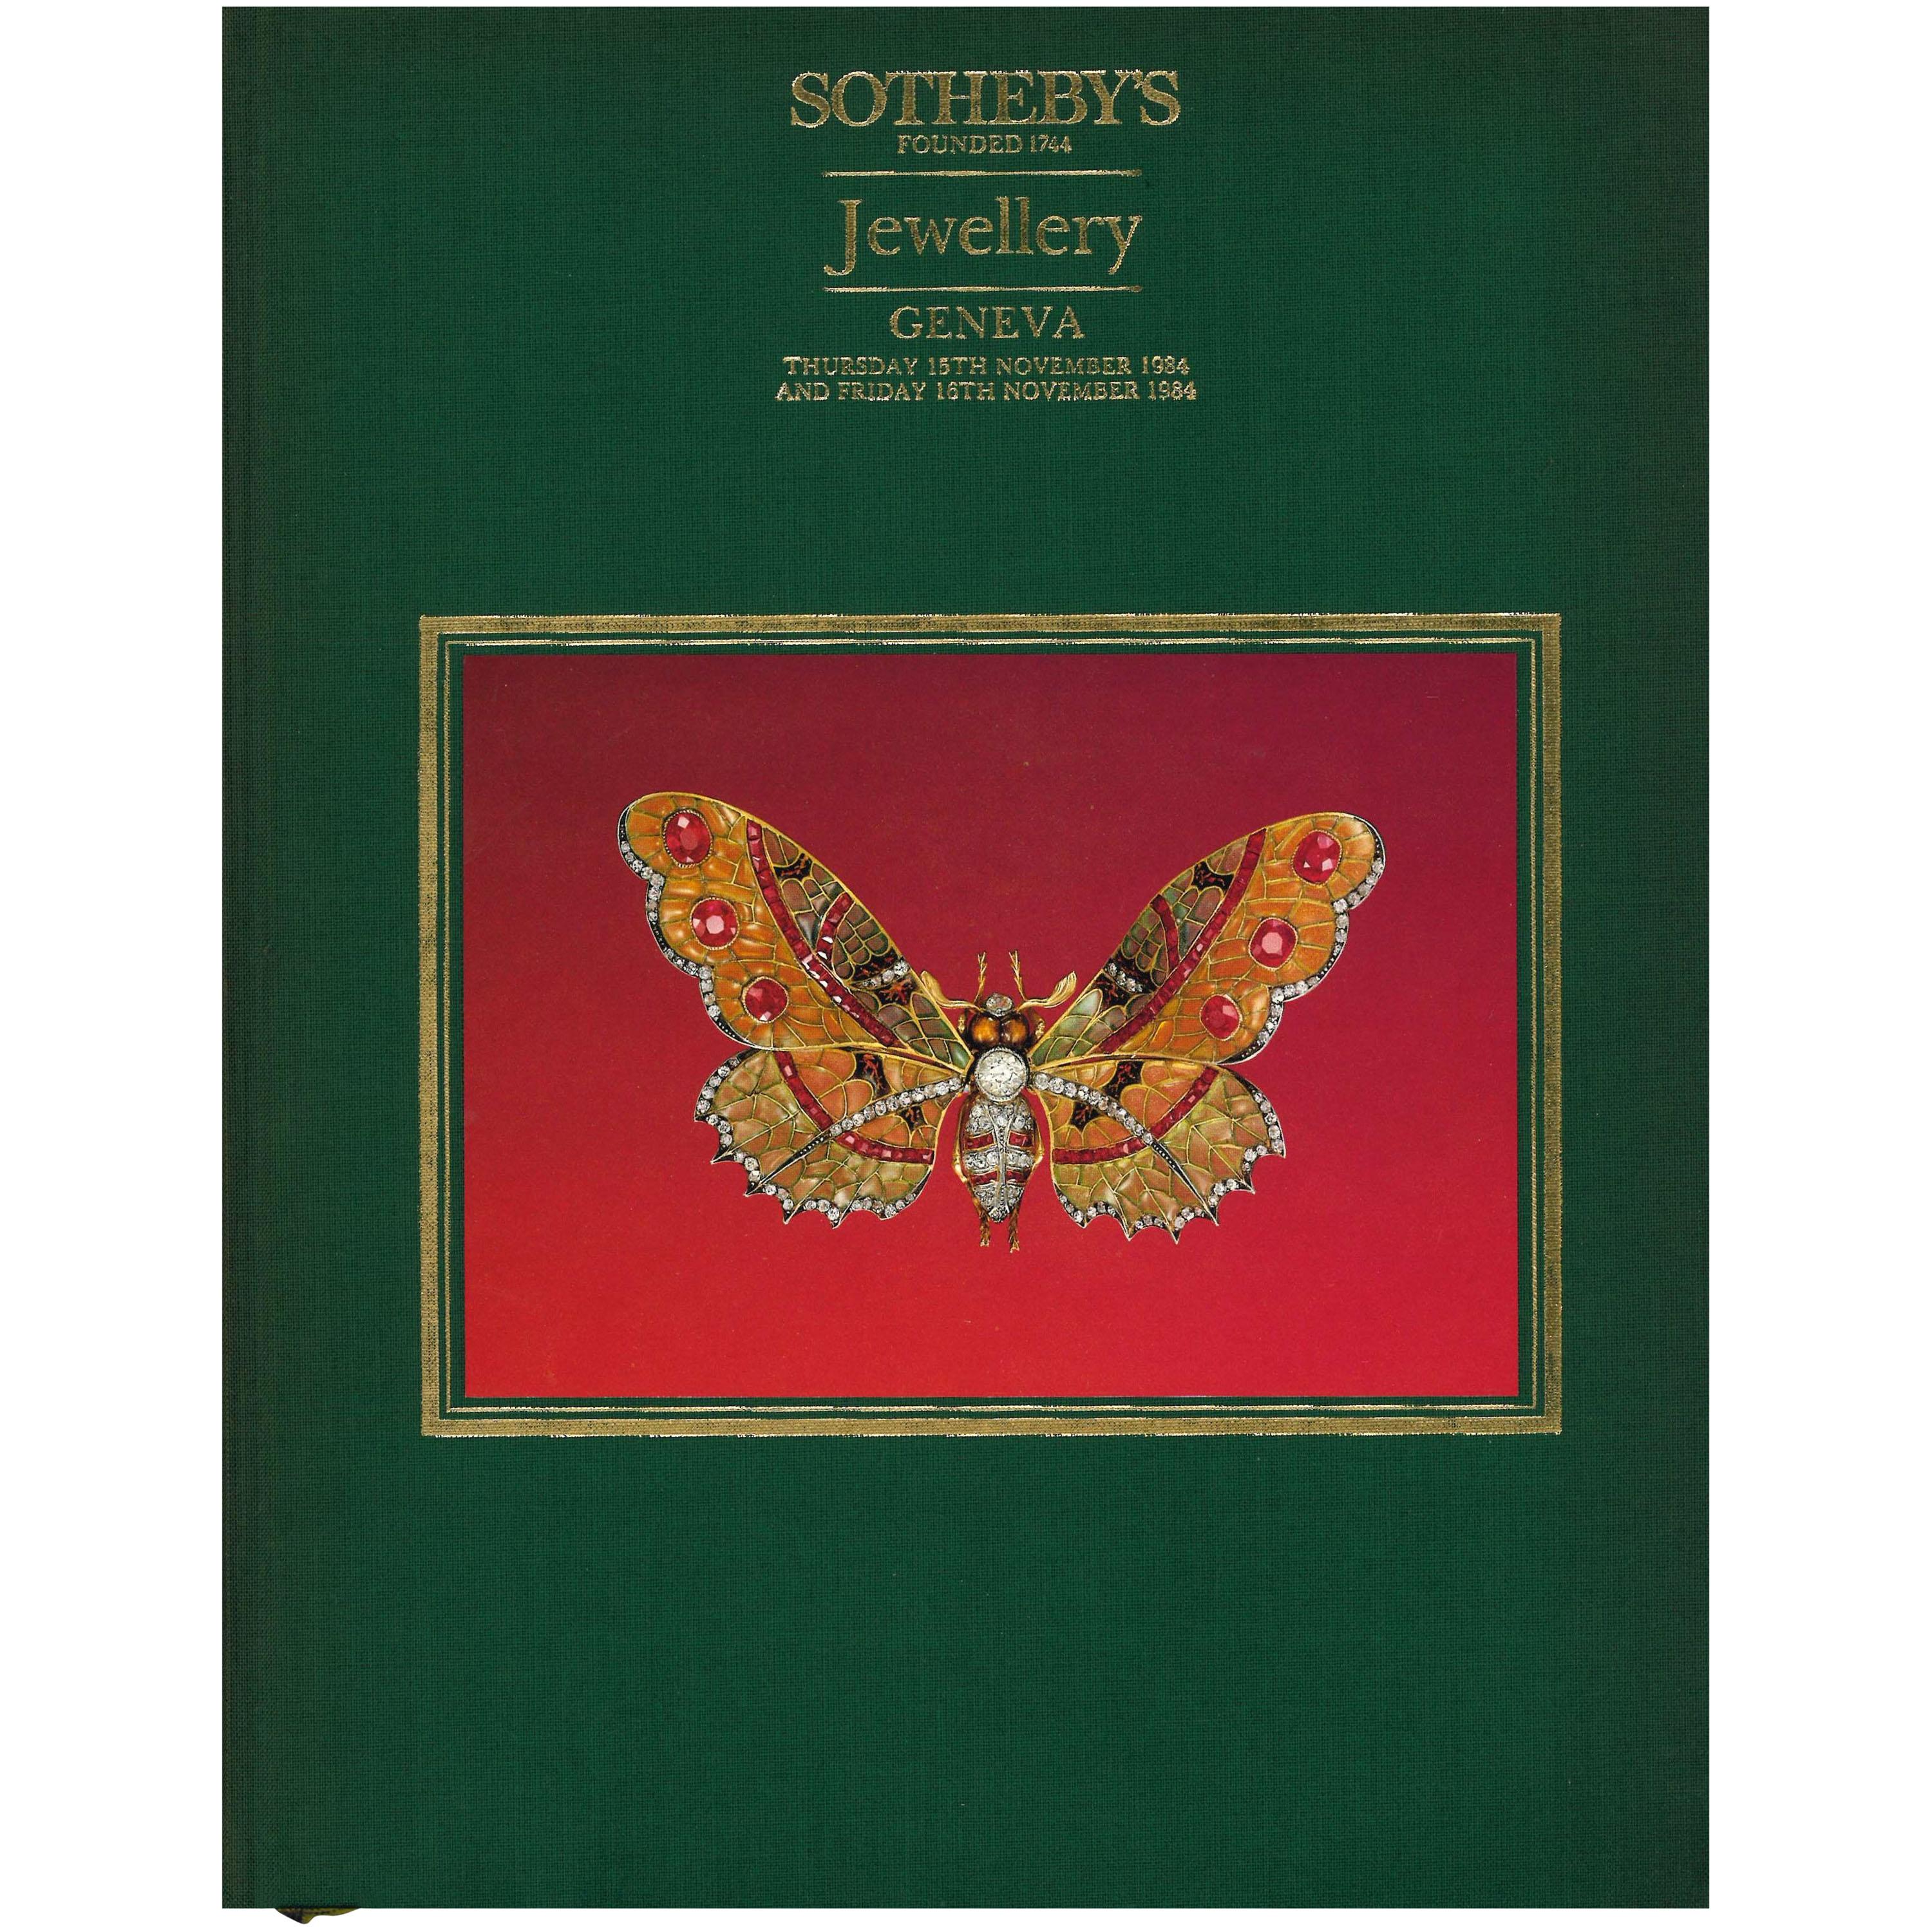 6 Sotheby's Jewellery Sale Catalogues Dating from 1980s